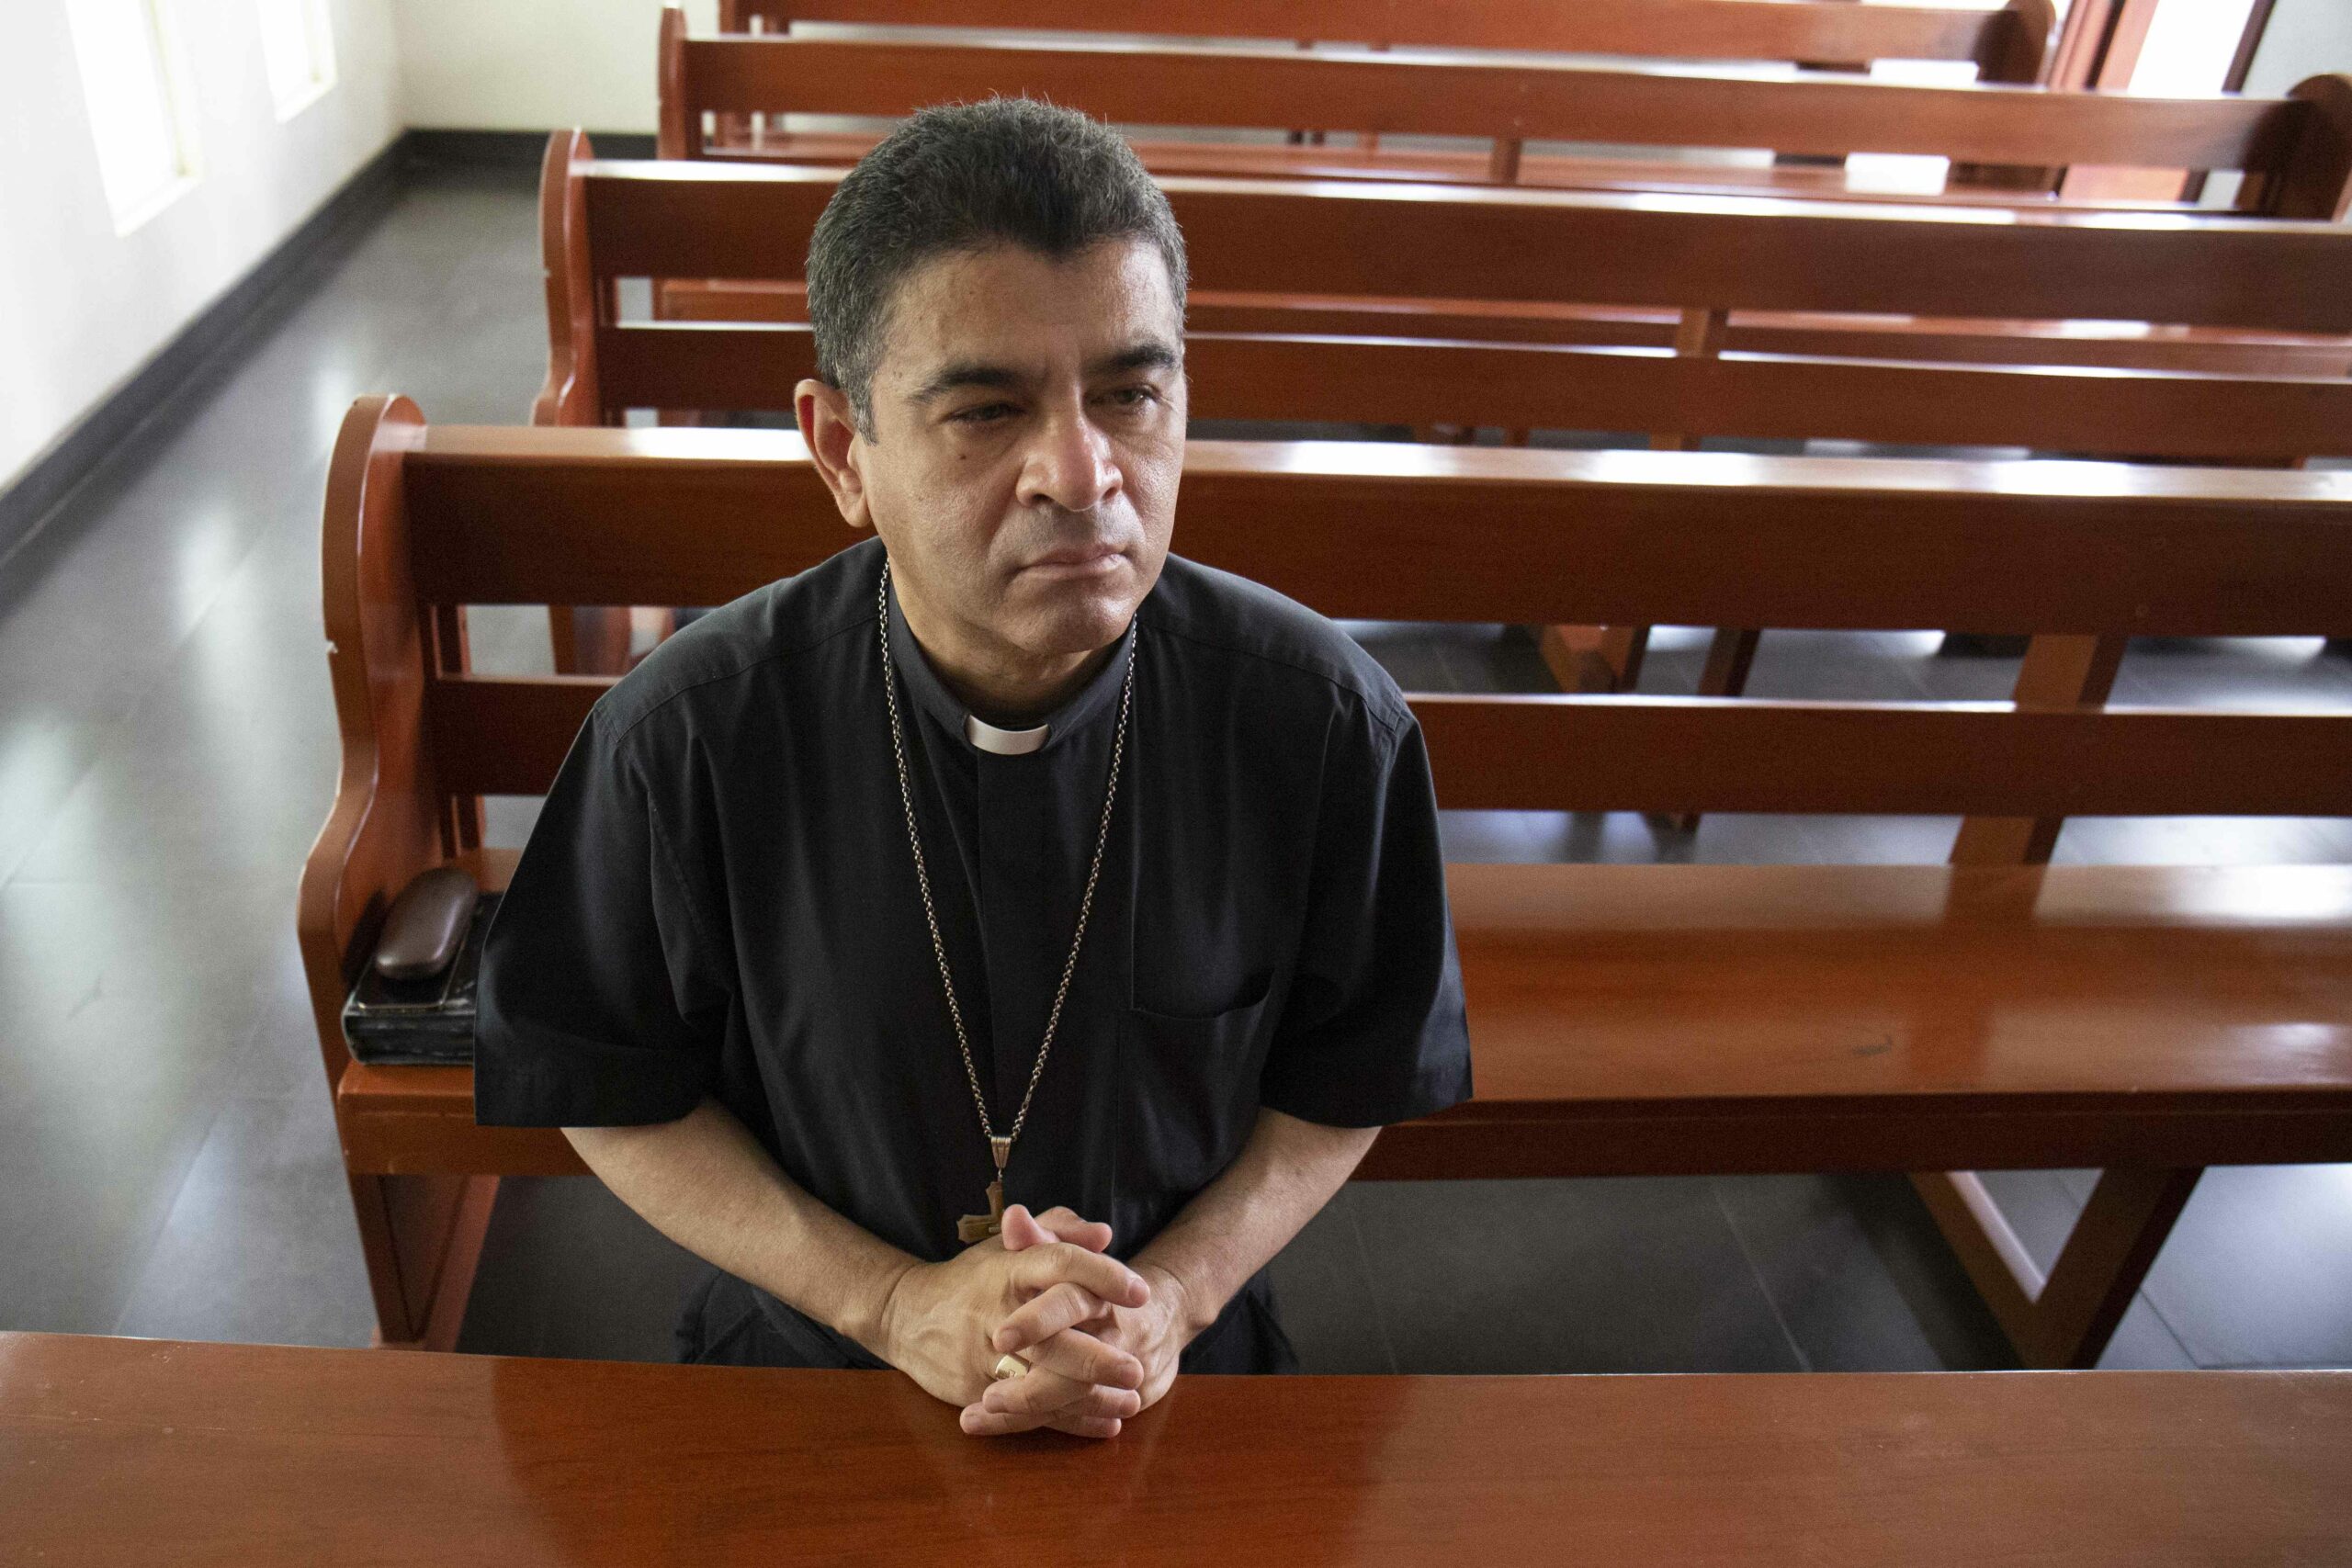 Dominican bishops show their solidarity with the “persecuted” Catholic Church in Nicaragua